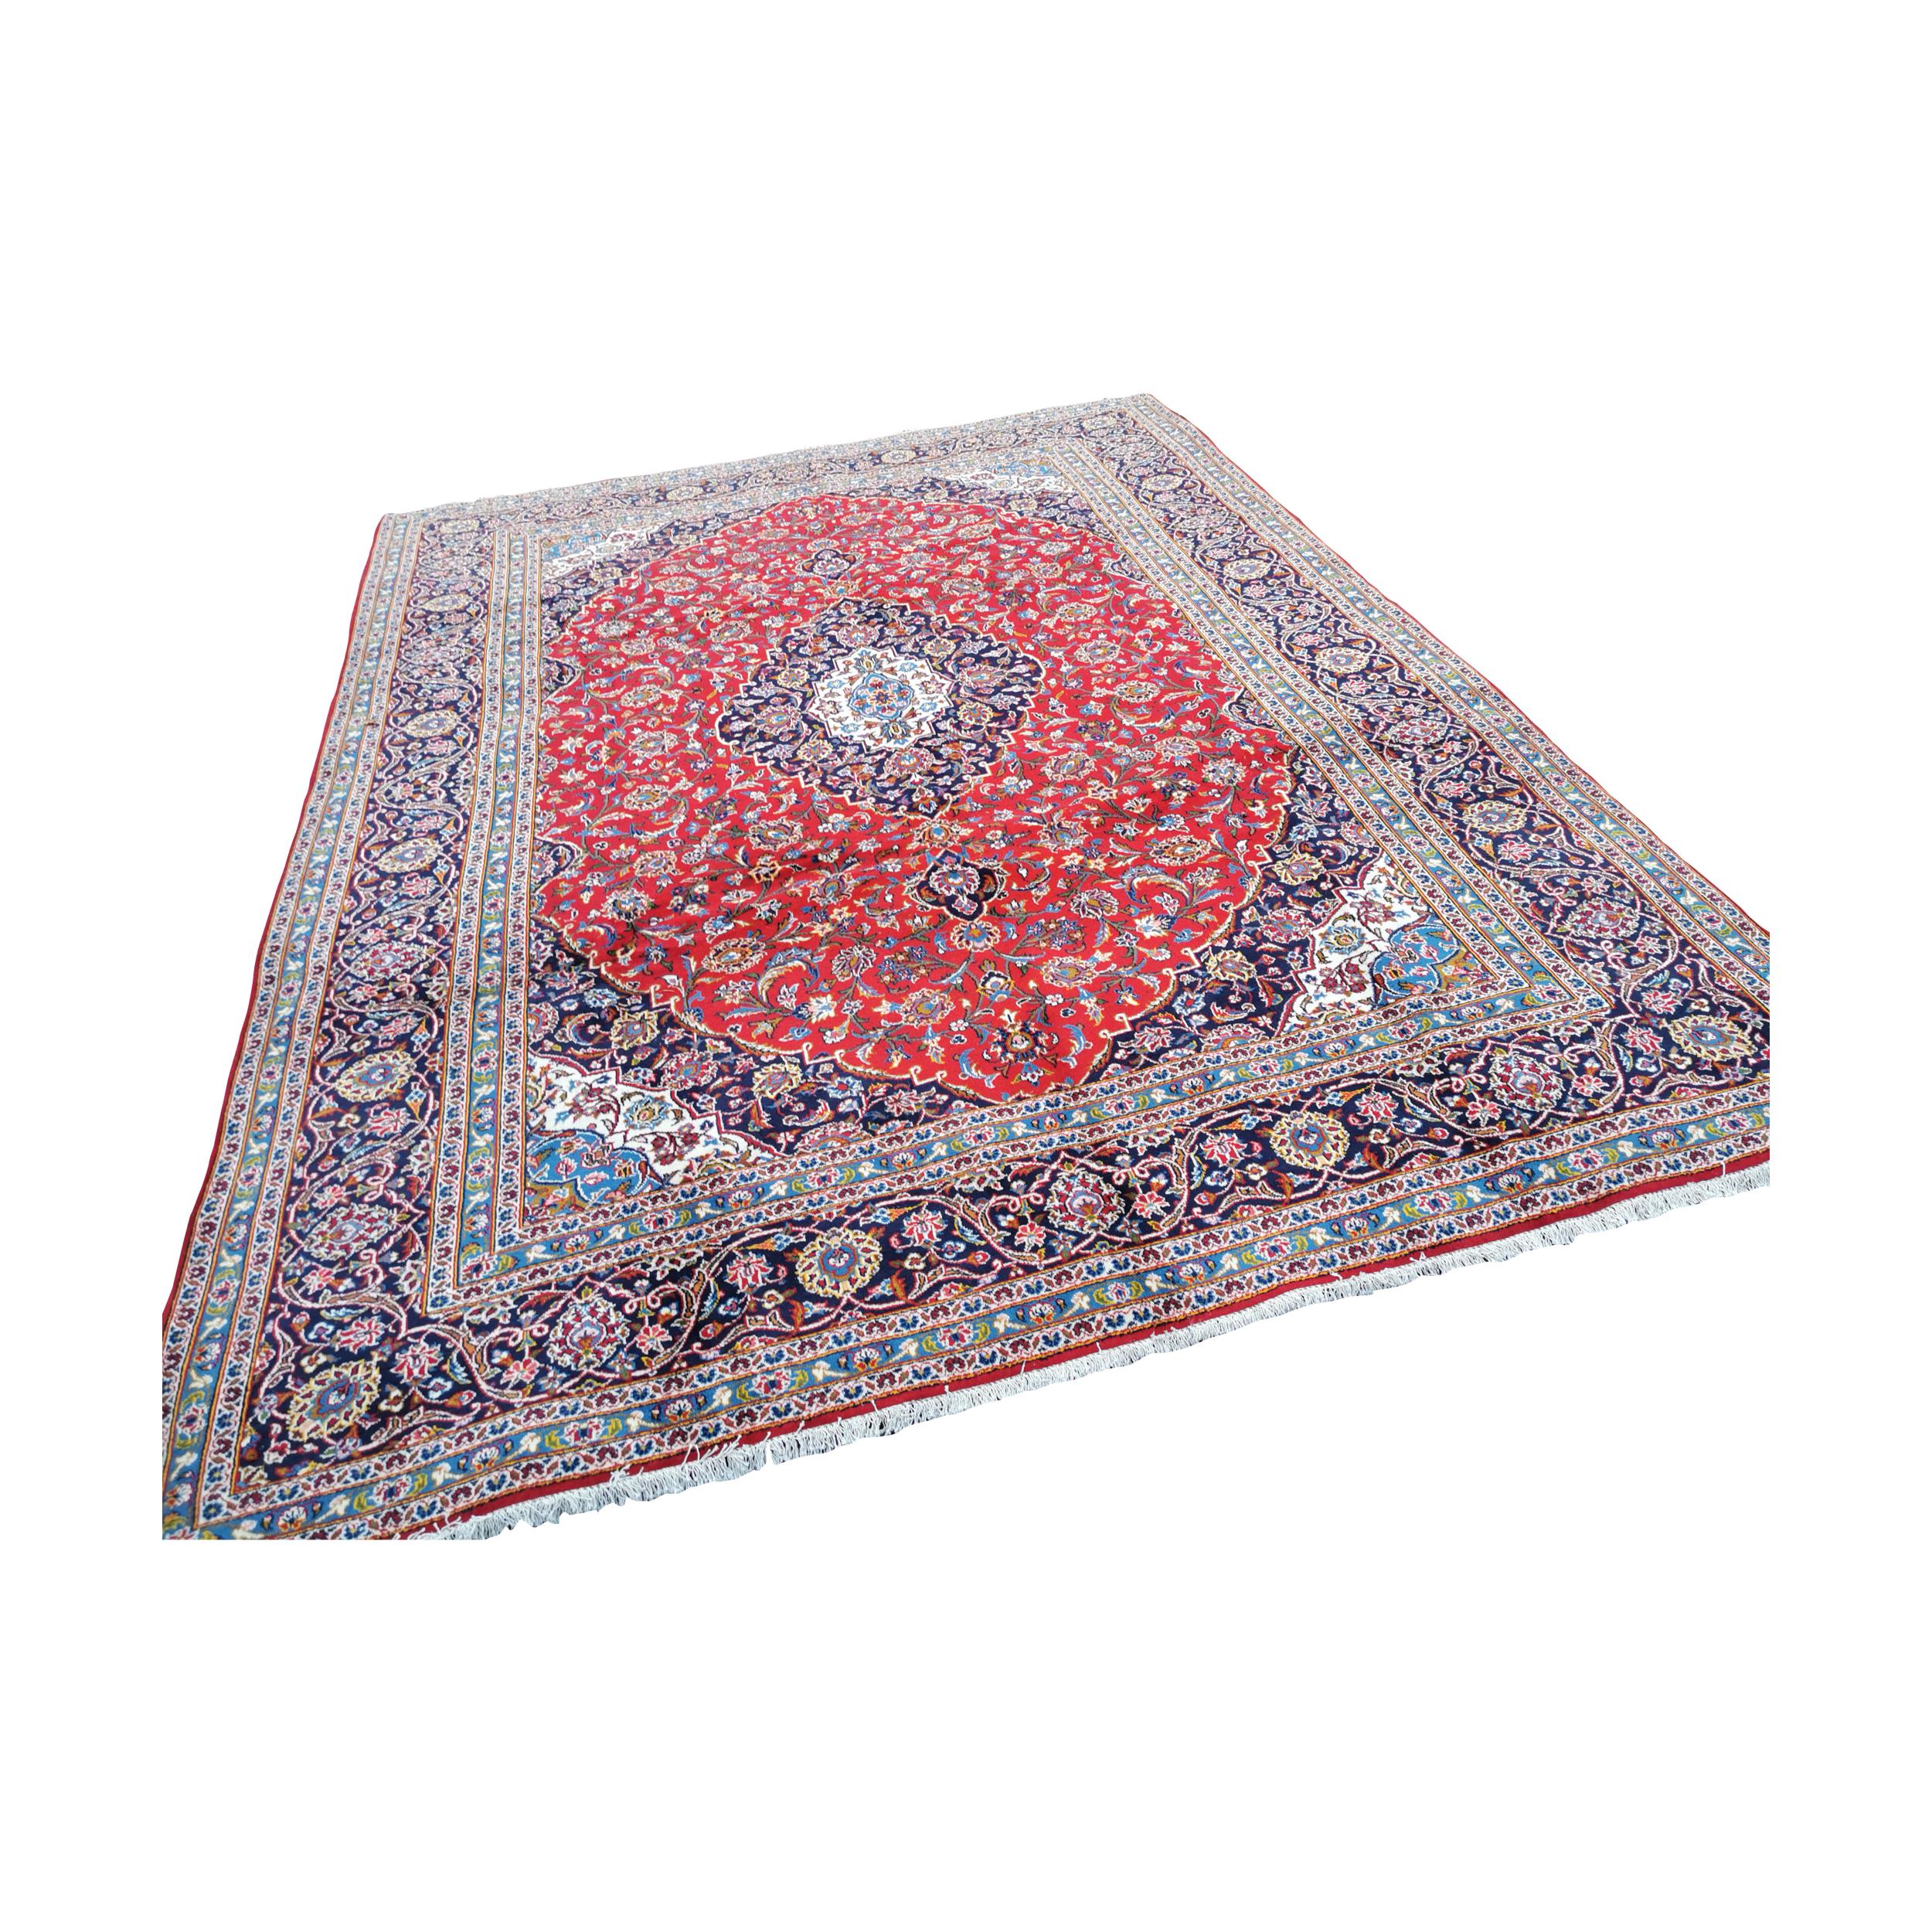 Good quality hand knotted Persian carpet square {342 cm L x 243 cm W}. - Image 2 of 7